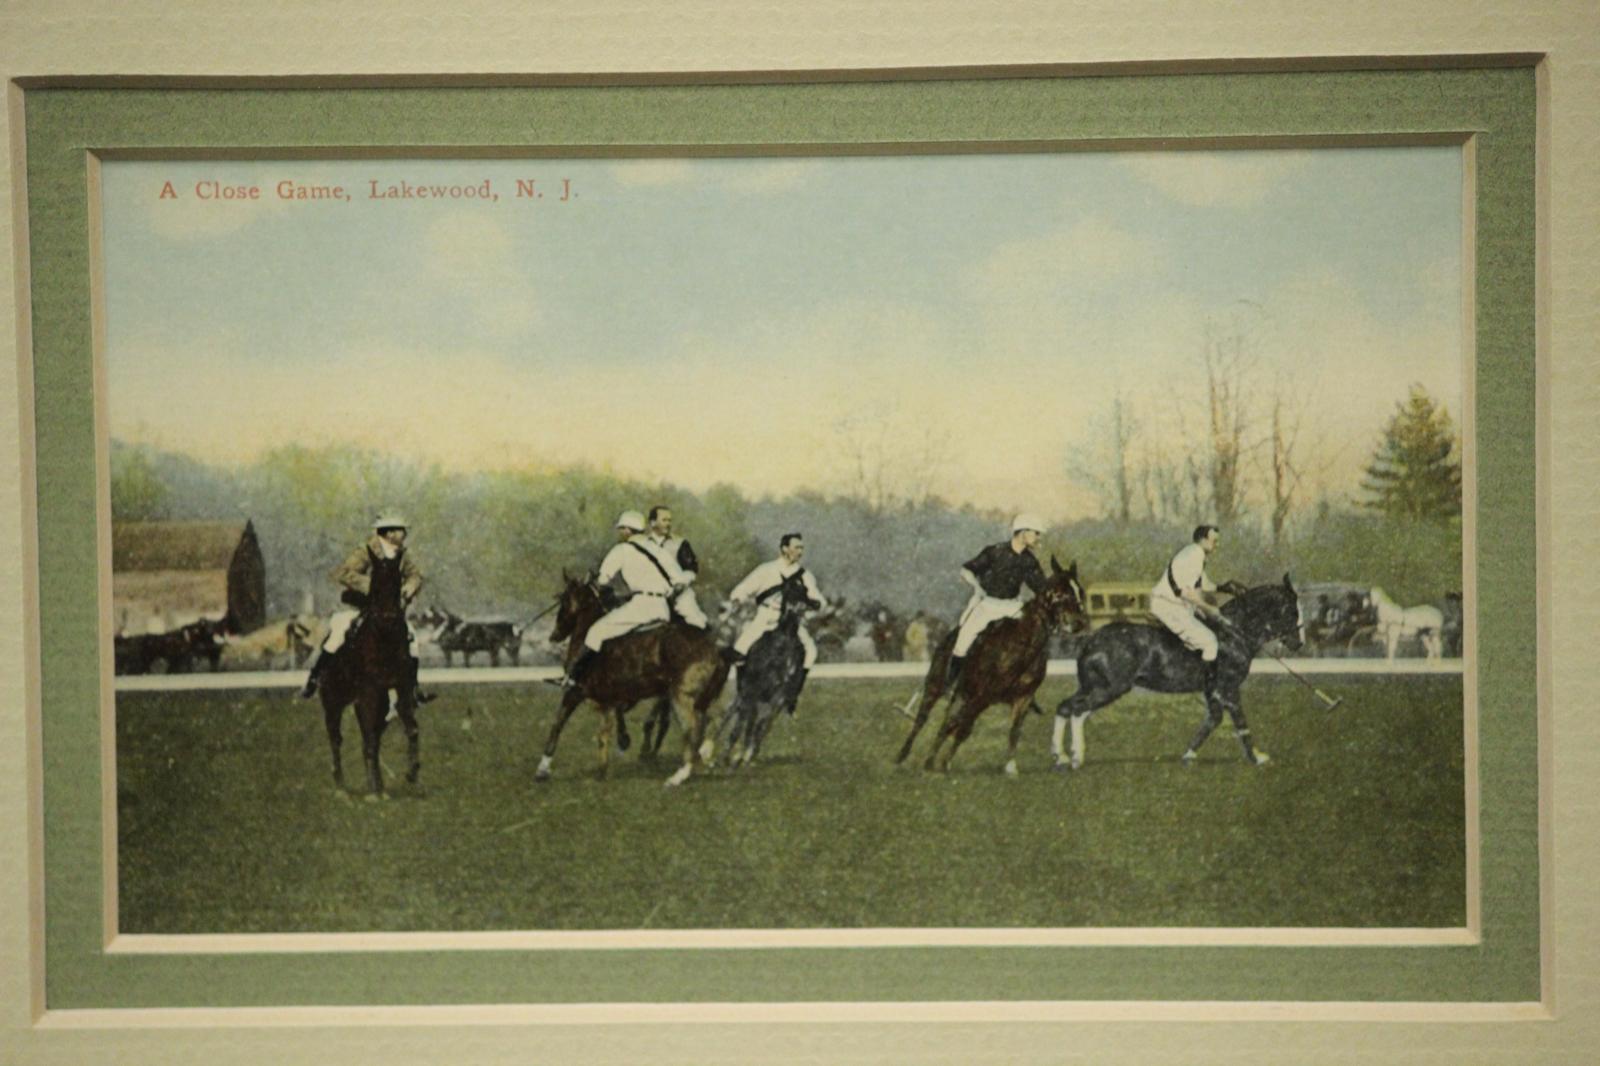 Rare color framed photo c1914 depicting a polo match in Lakewood, NJ

Photo Sz: 3